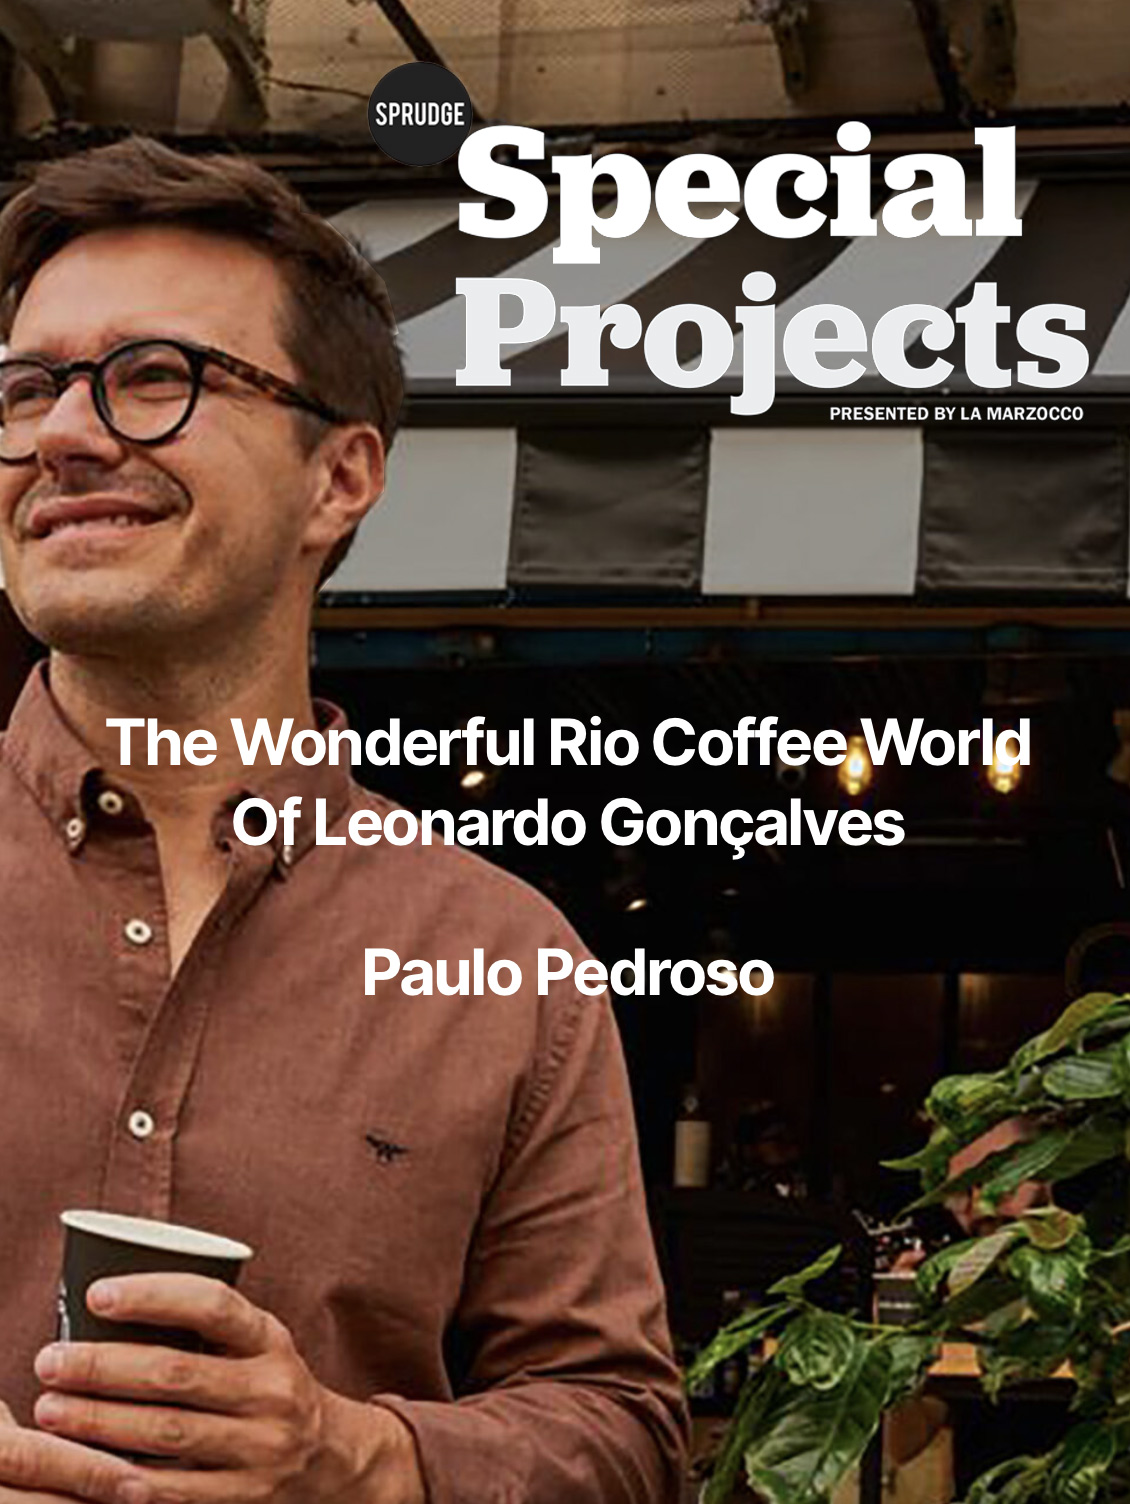 sprudge special projects desk september feature